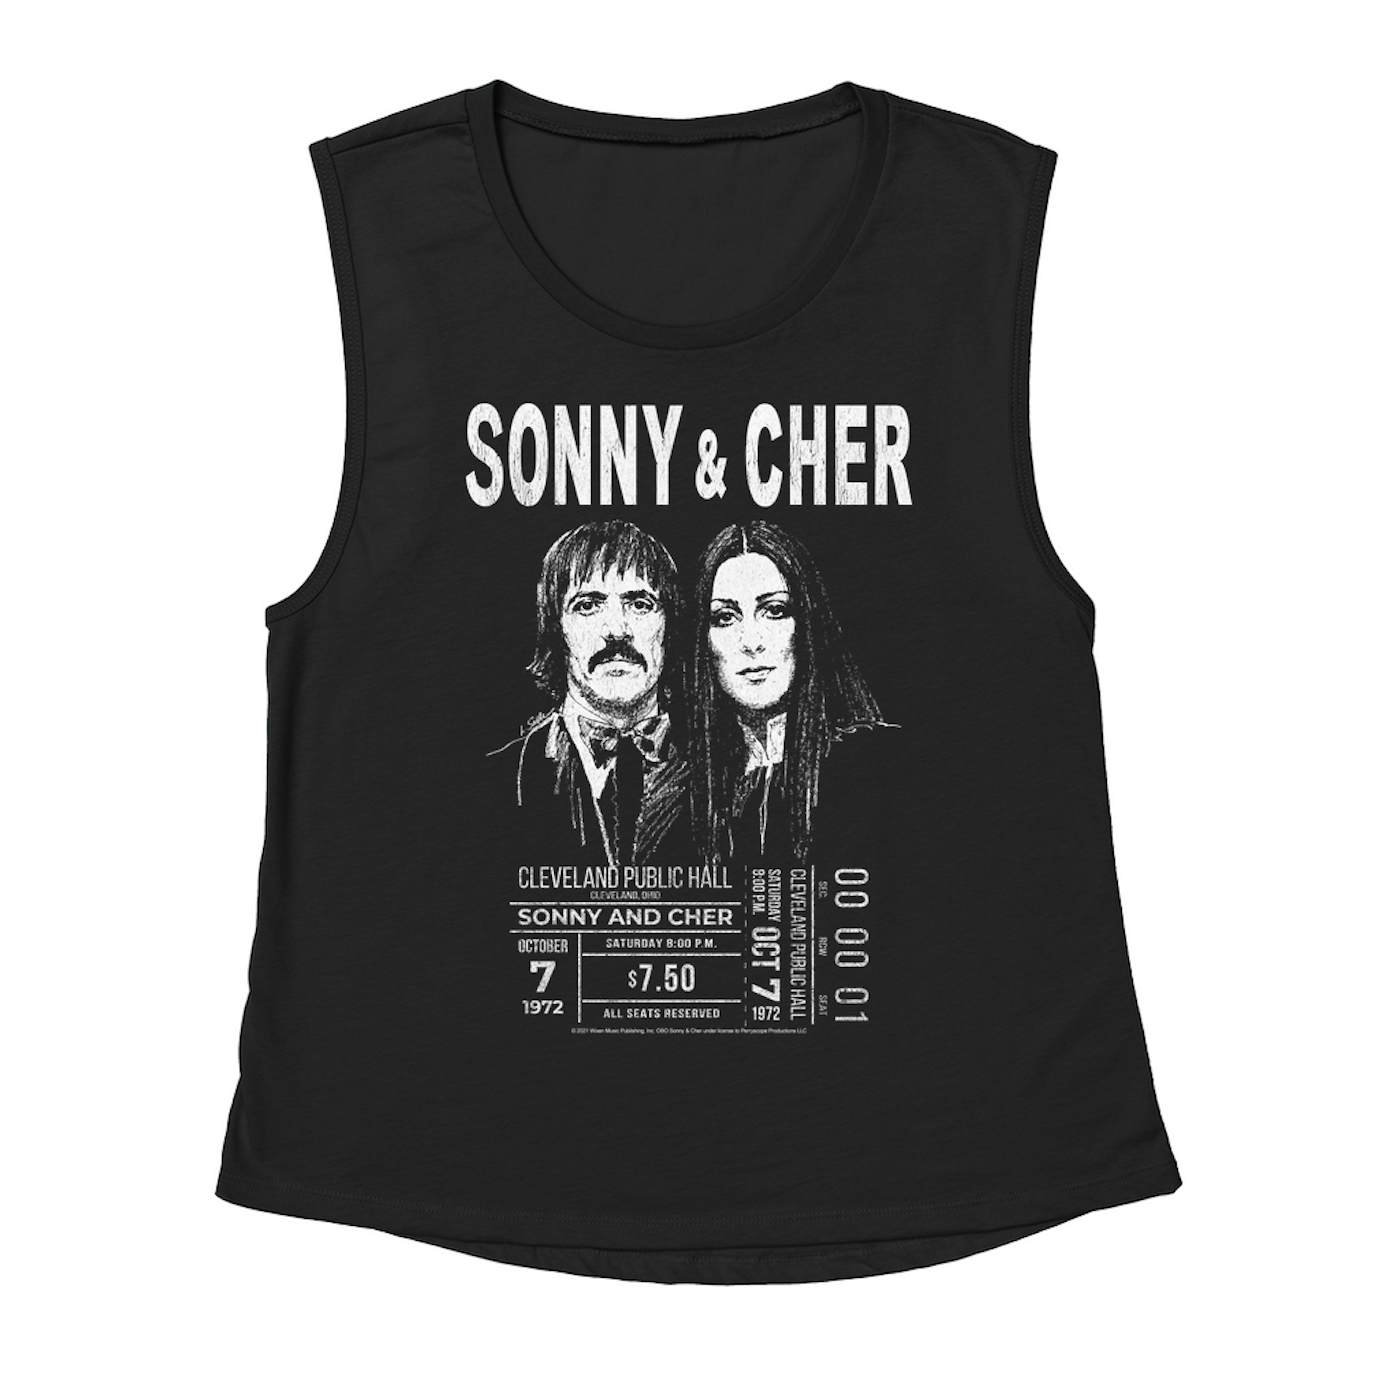 Sonny & Cher Ladies' Muscle Tank Top | Cleaveland Hall Concert Ticket Stub Sonny and Cher Shirt (Merchbar Exclusive)